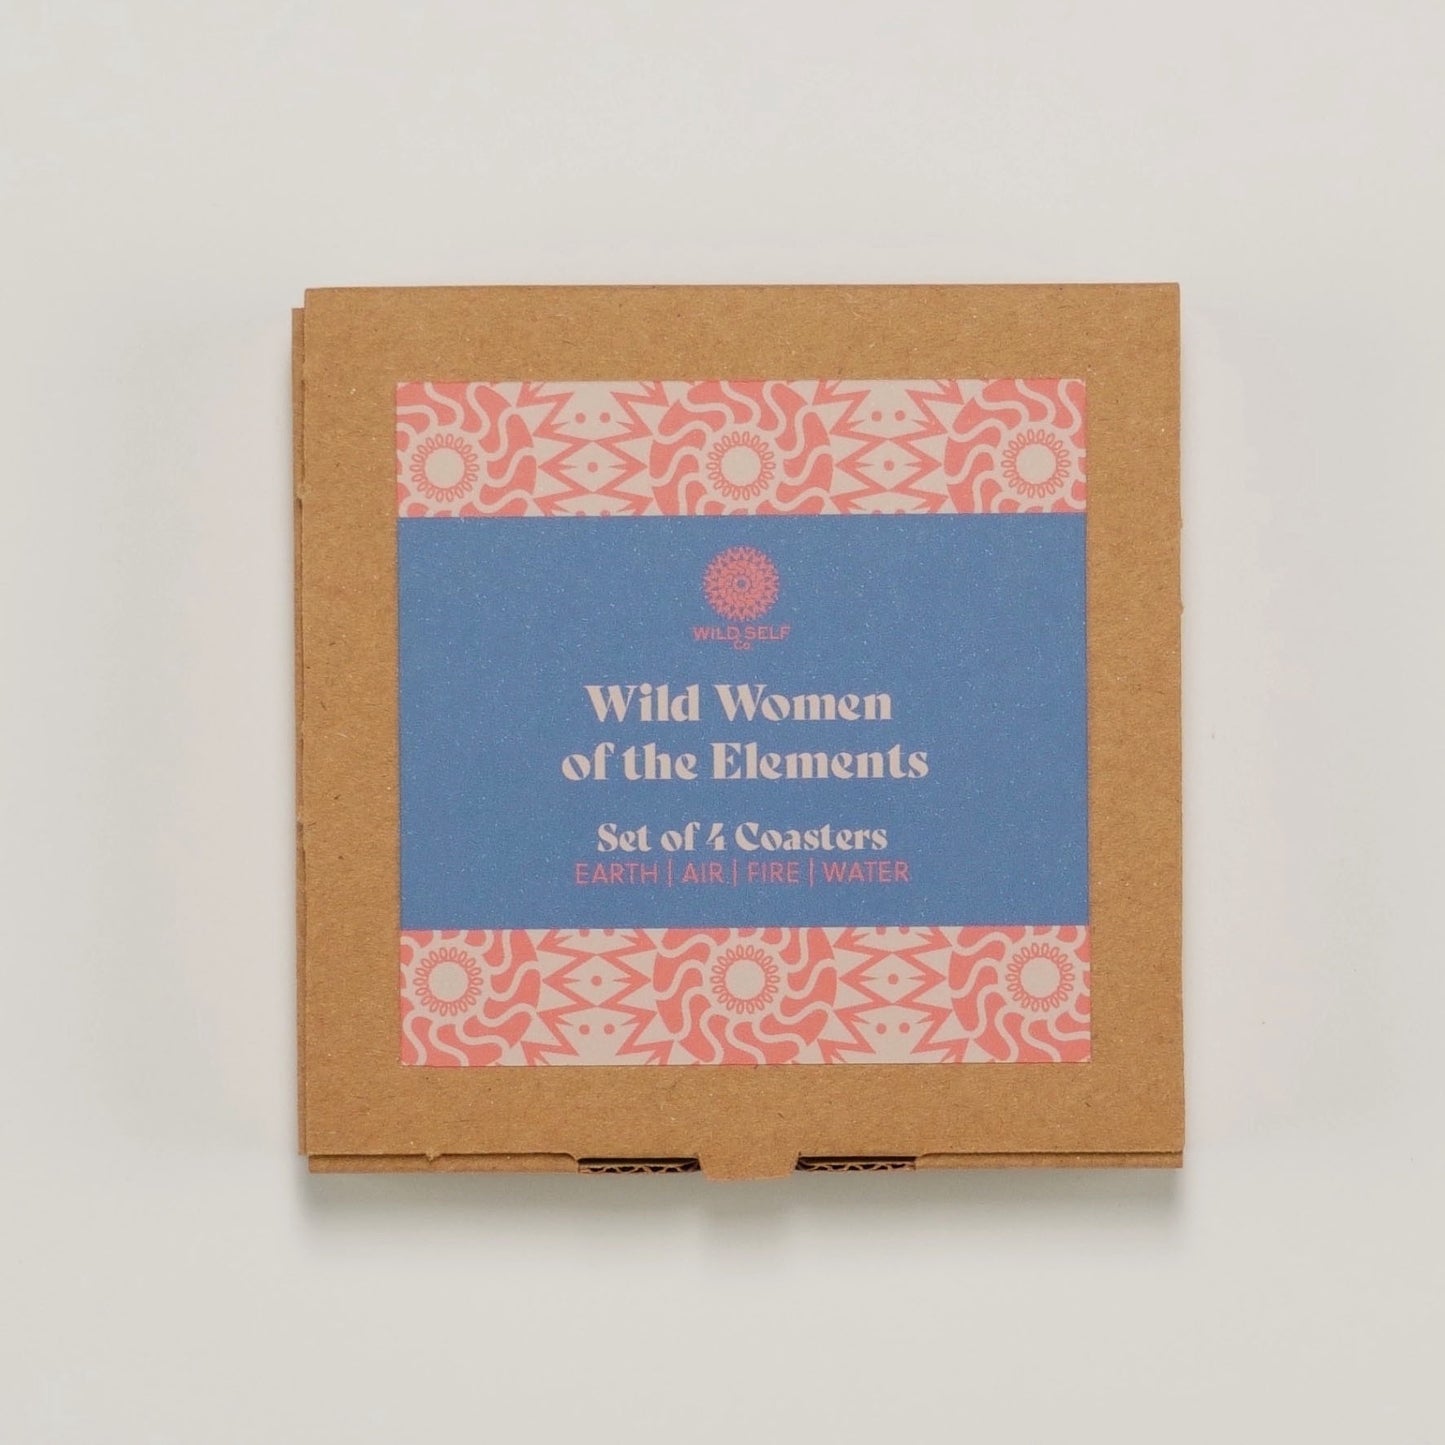 Wild Women of the Elements - Set of 4 coasters